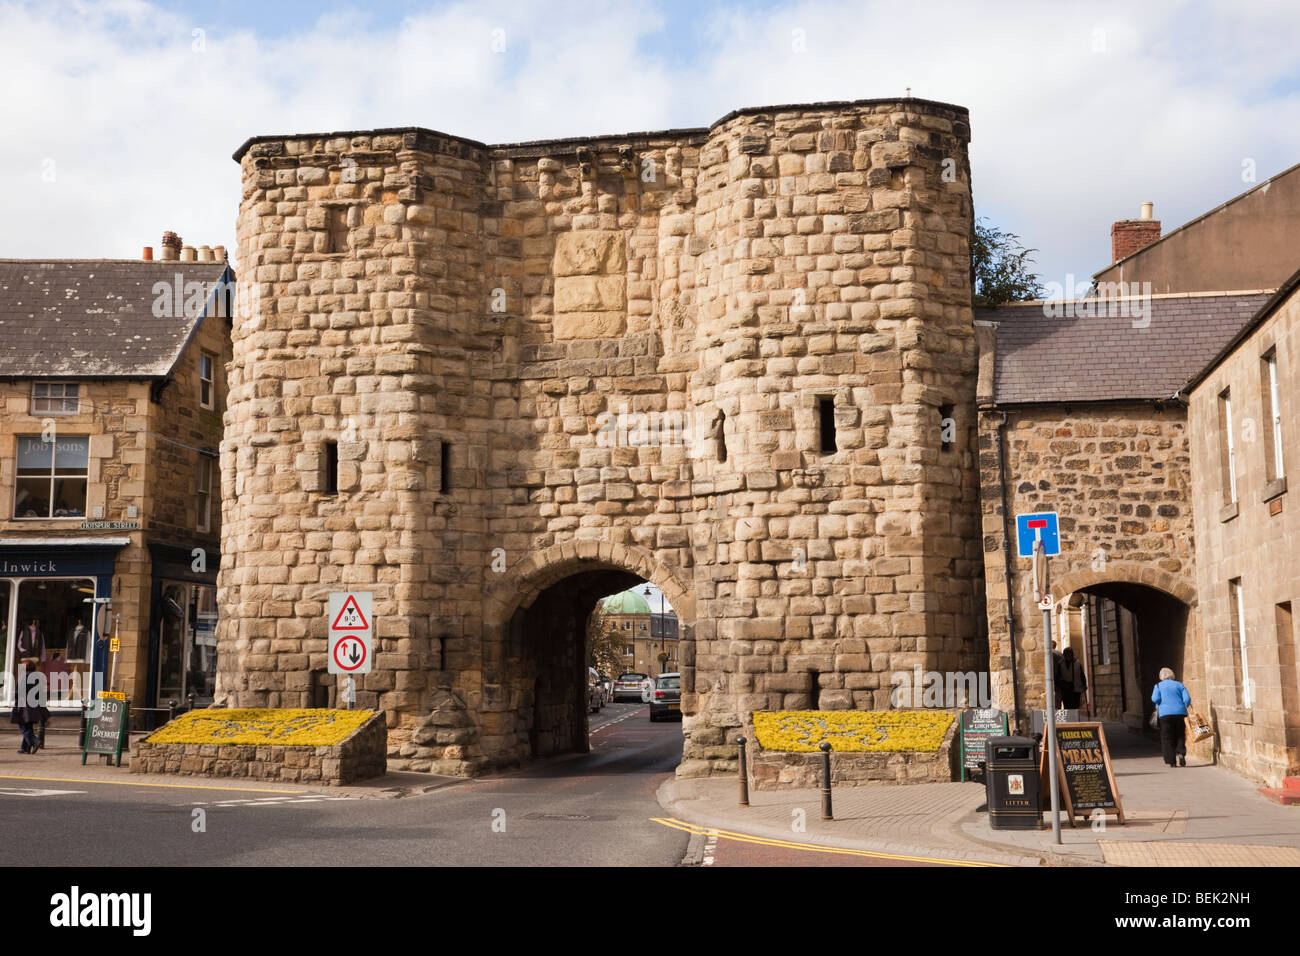 Alnwick, Northumberland, England, UK, Europe. Bondgate (Hotspur) Tower part of the old town walls Stock Photo